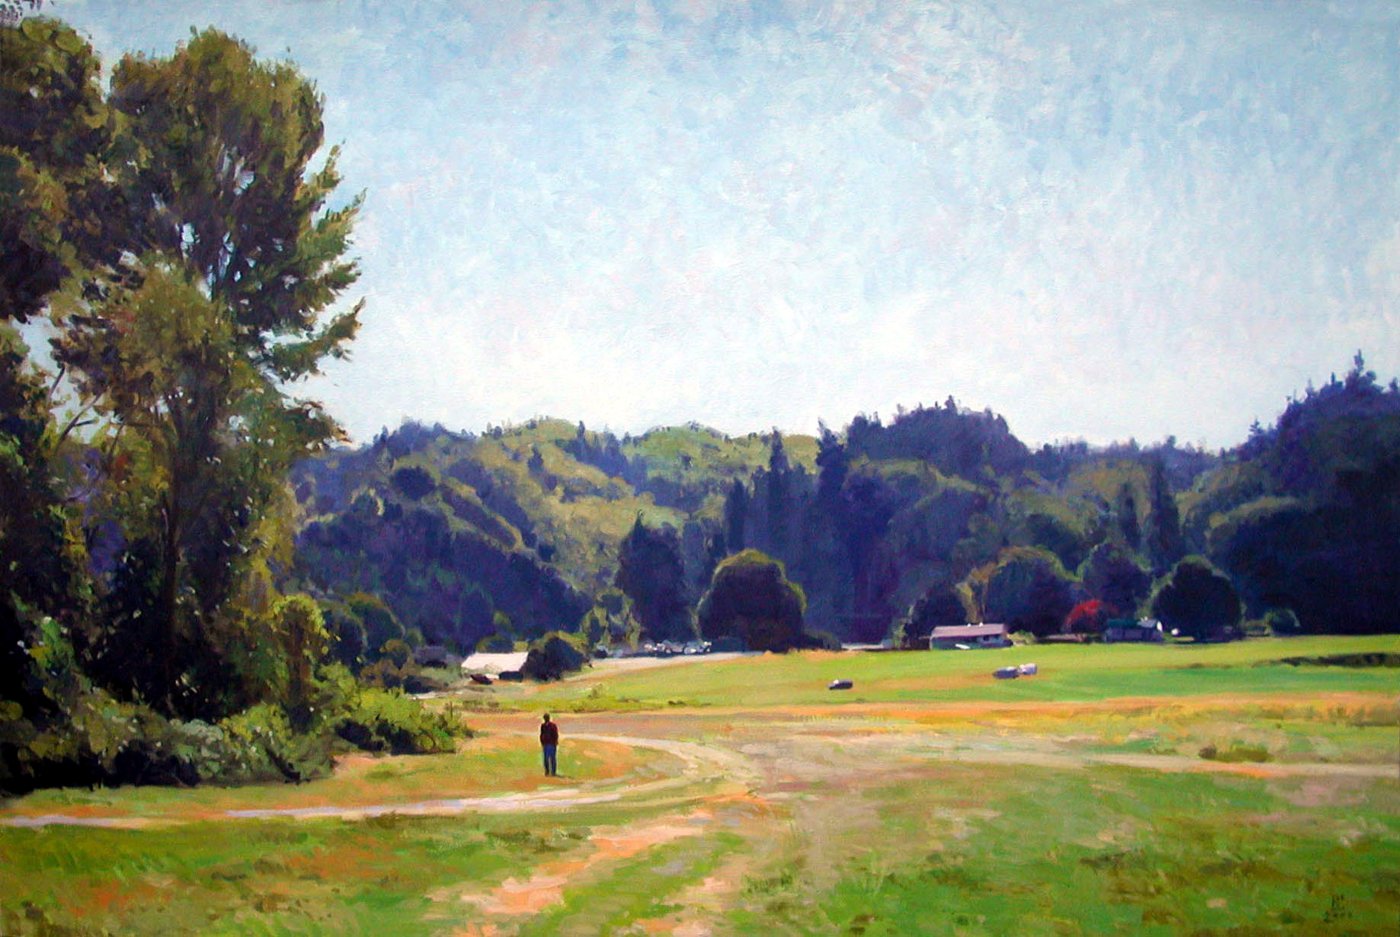 Perfect Blue Day, oil on canvas, 48 X 72 inches, copyright ©2001